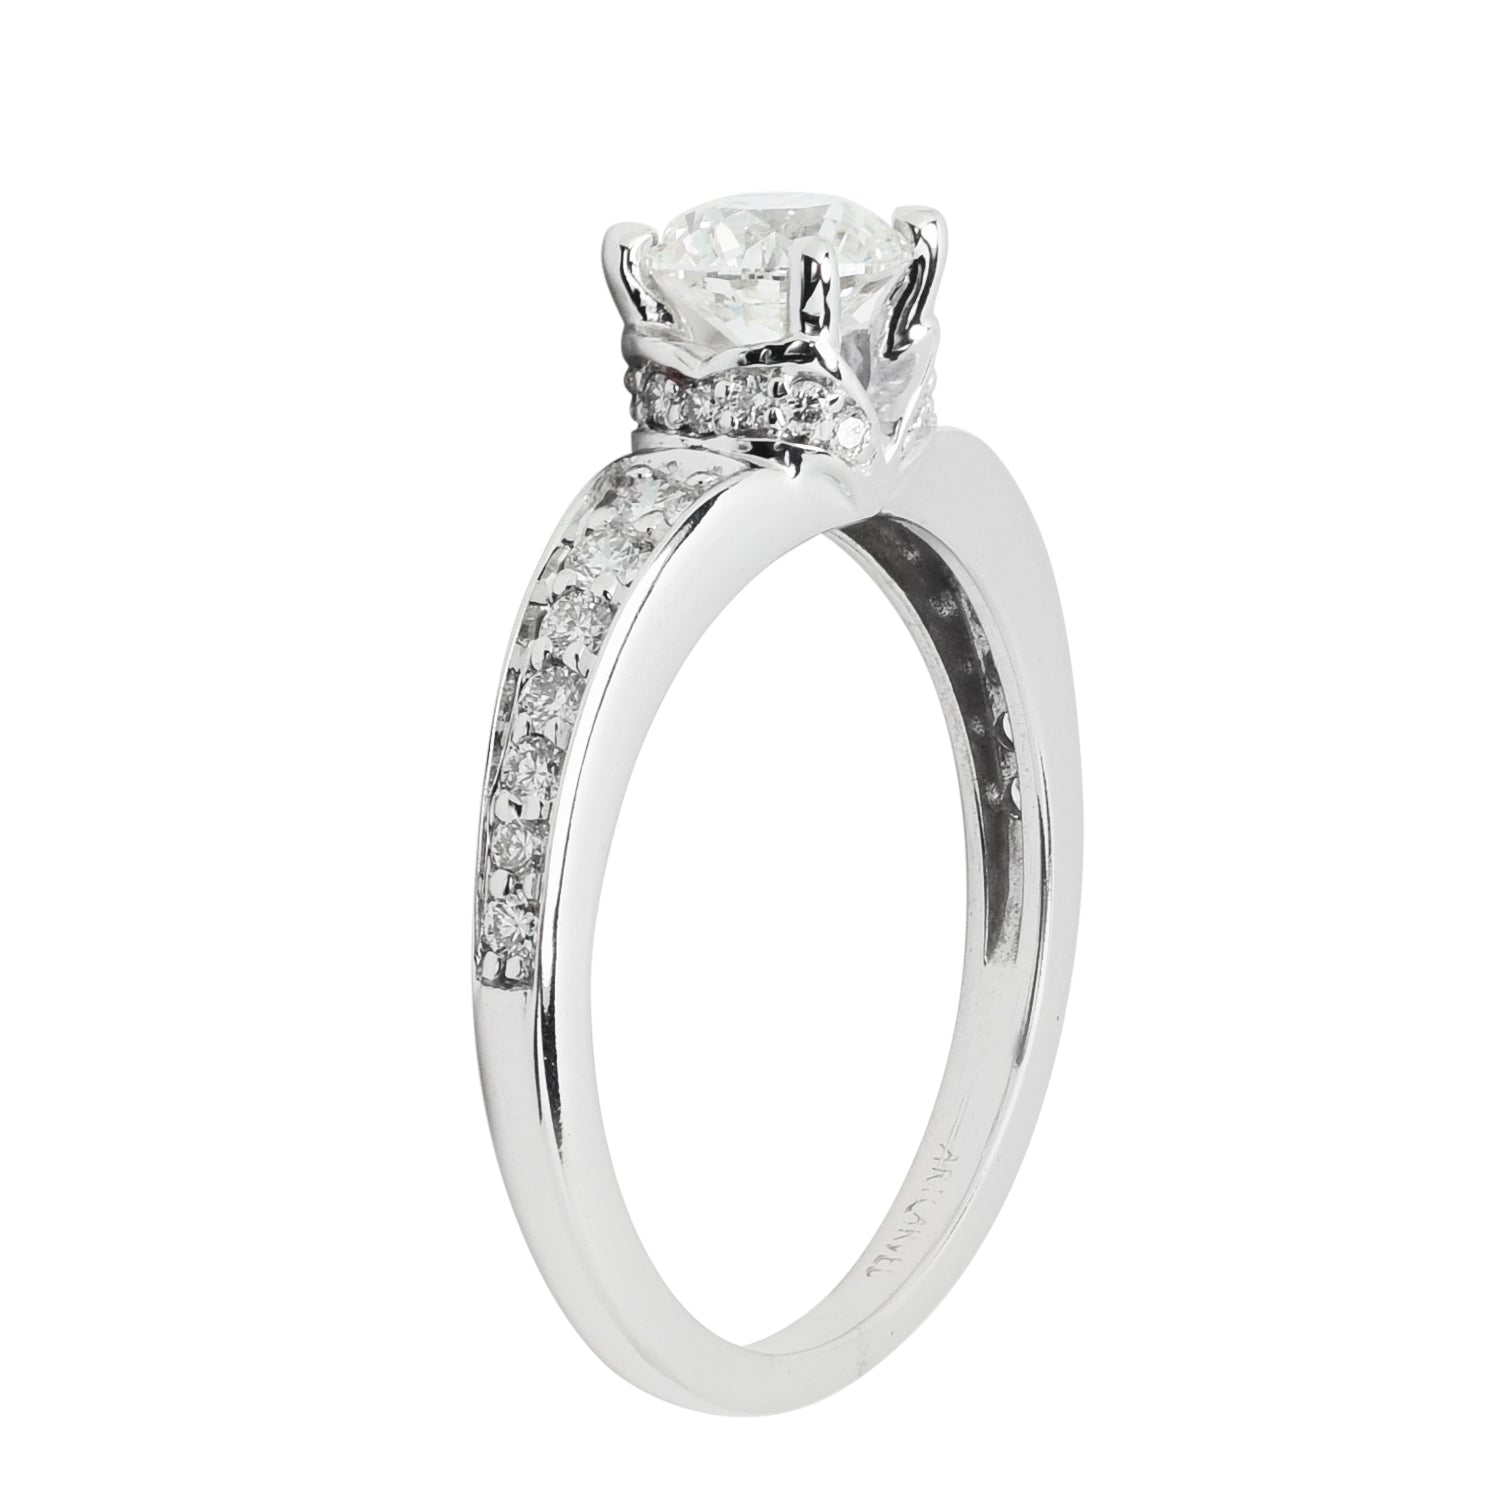 Estate Diamond Engagement Ring in 14kt White Gold (1ct tw)